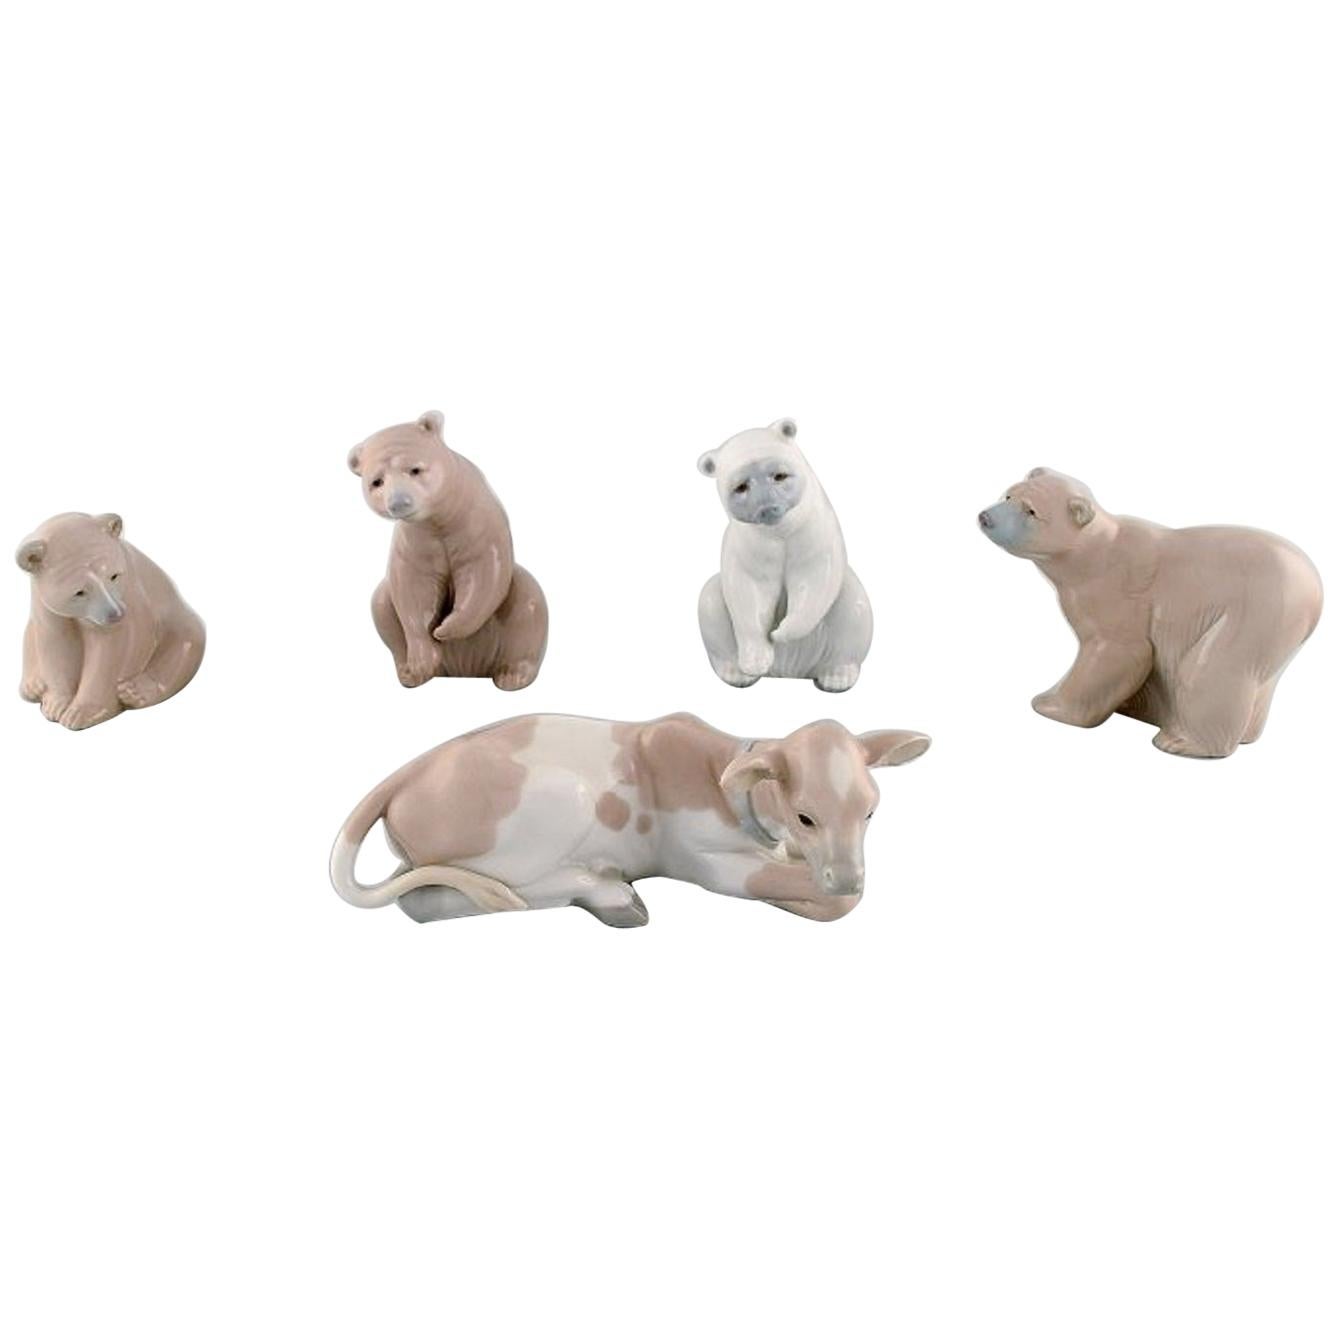 Lladro, Spain, Five Porcelain Figurines, Four Bears and a Calf, 1980s-1990s For Sale